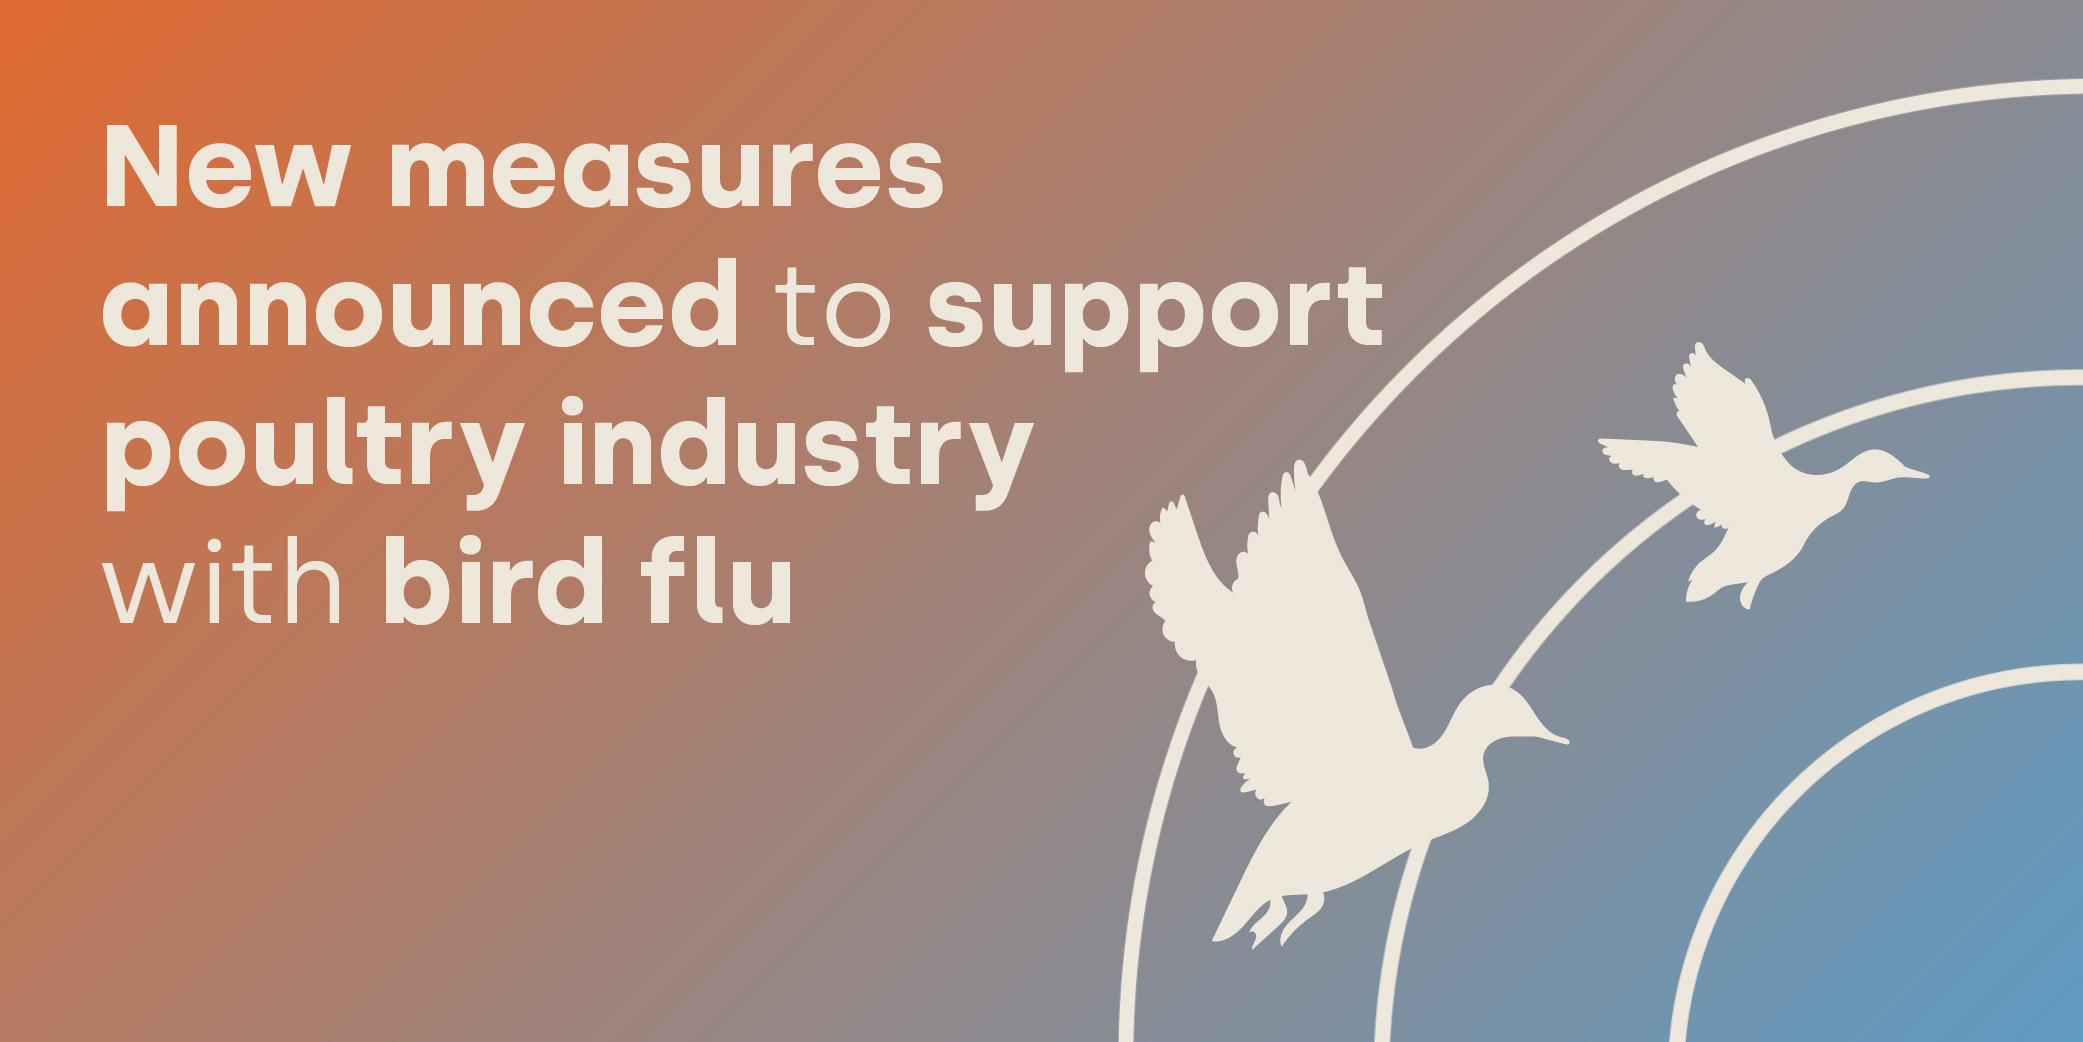 Defra announces new measures designed to support the poultry industry with bird flu